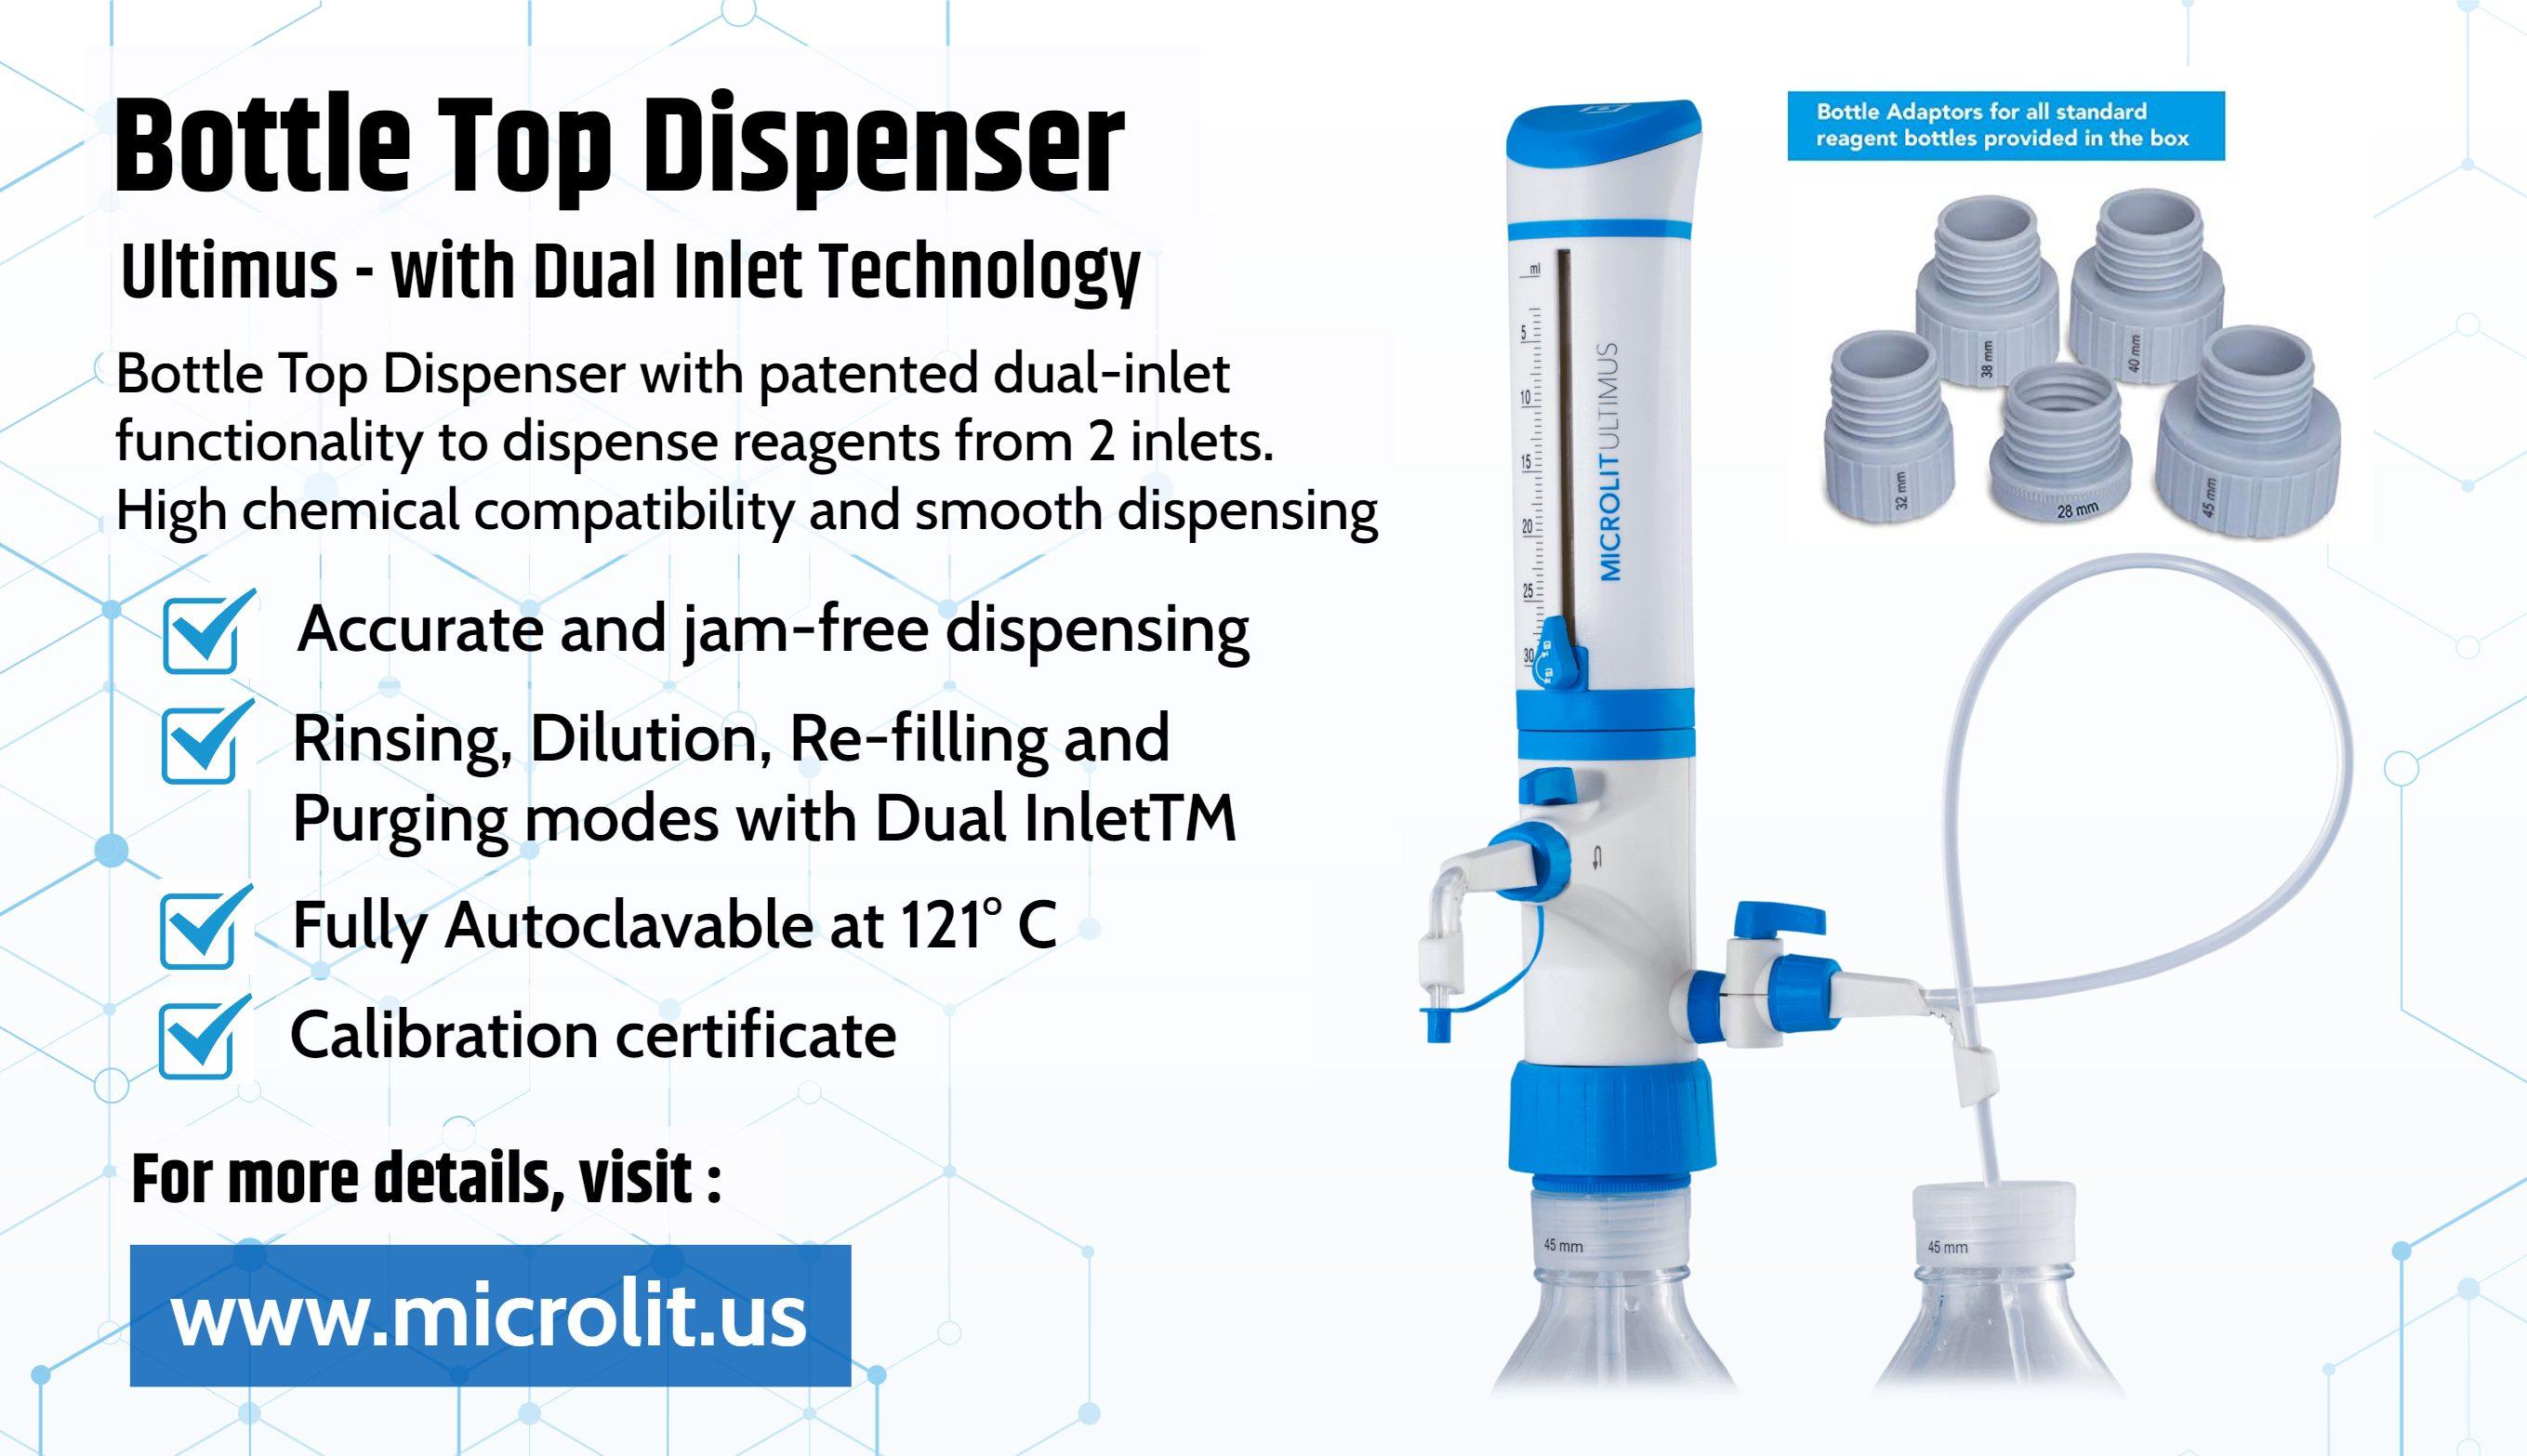 Image - Microlit offers the best #BottleTopDispenser with dual-inlet functionality to dispense reagents from 2 inlets...